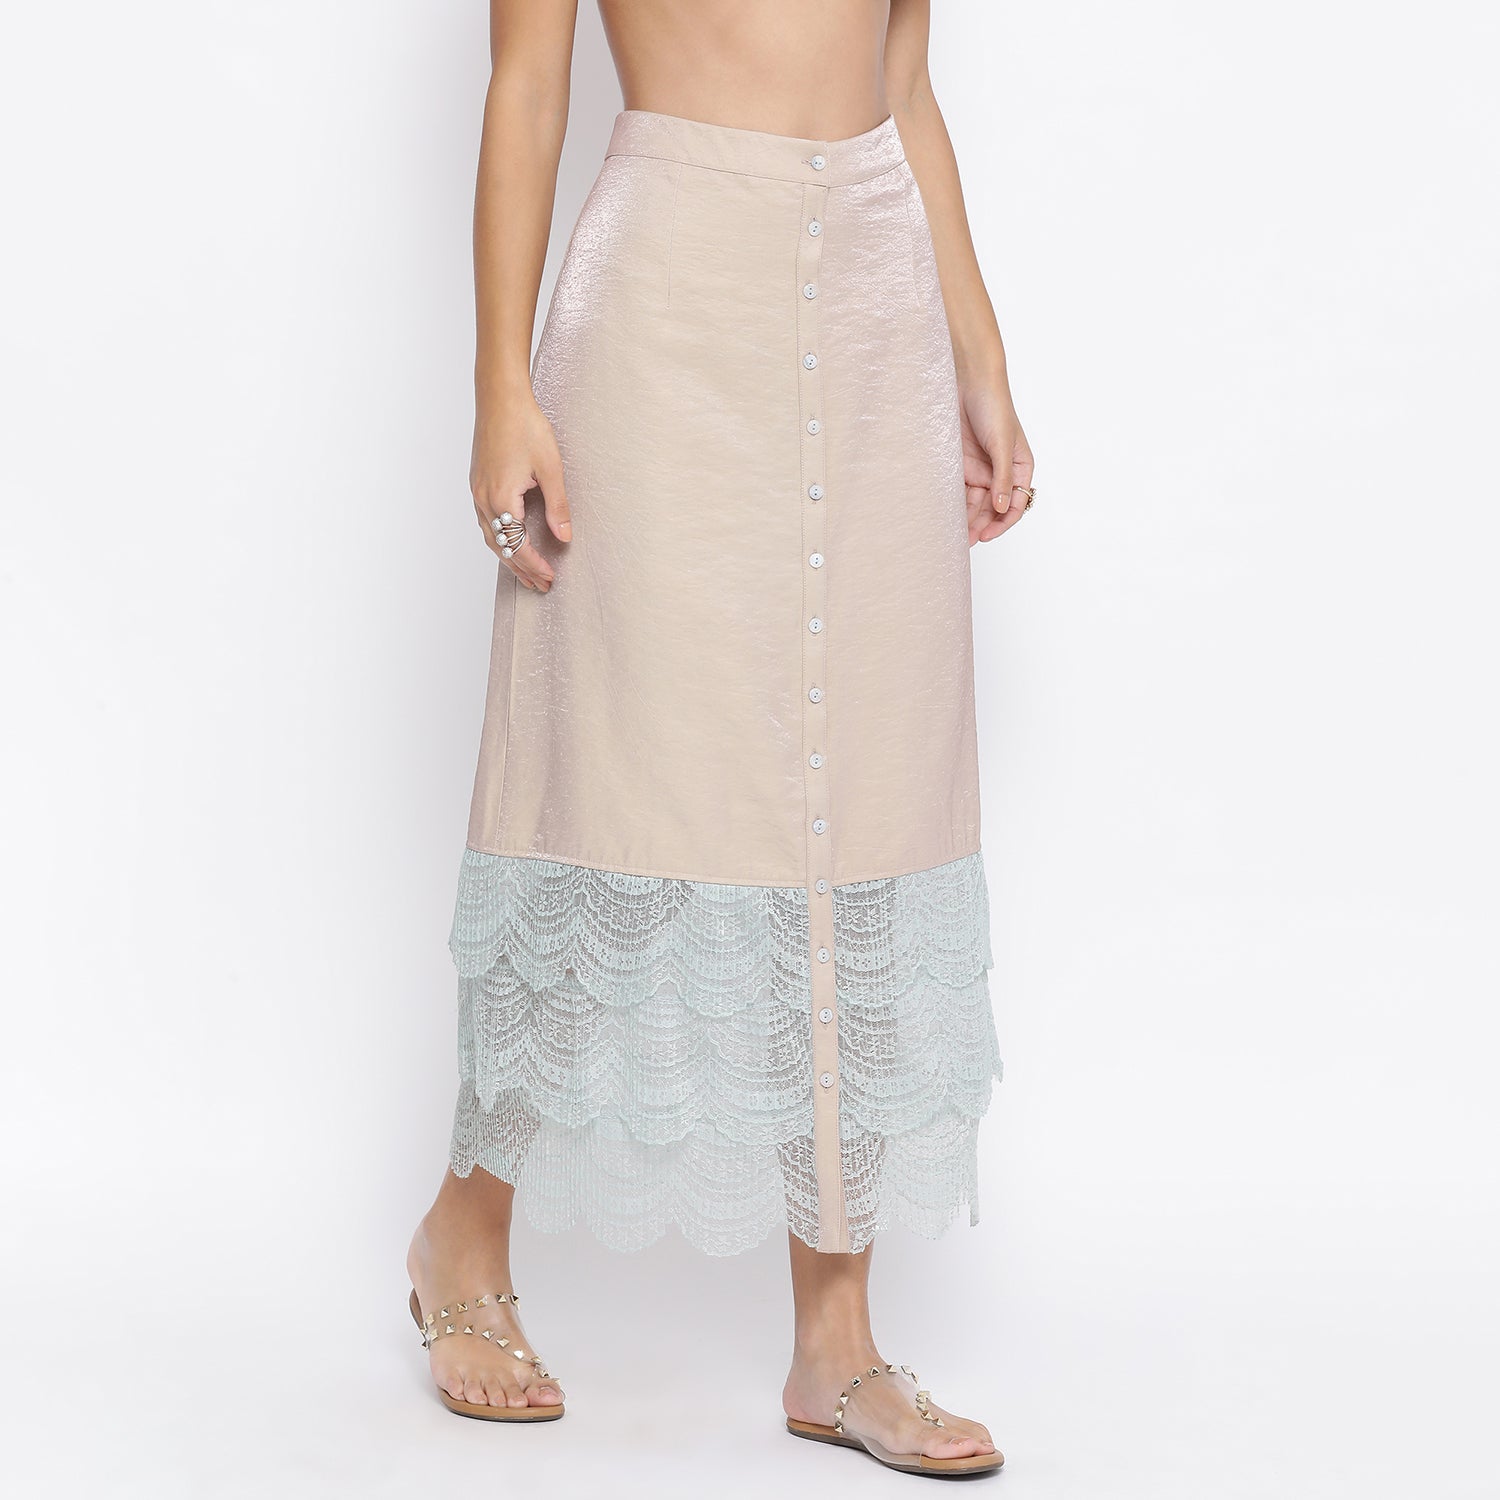 Beige Skirt With Scallop Lace At Hem